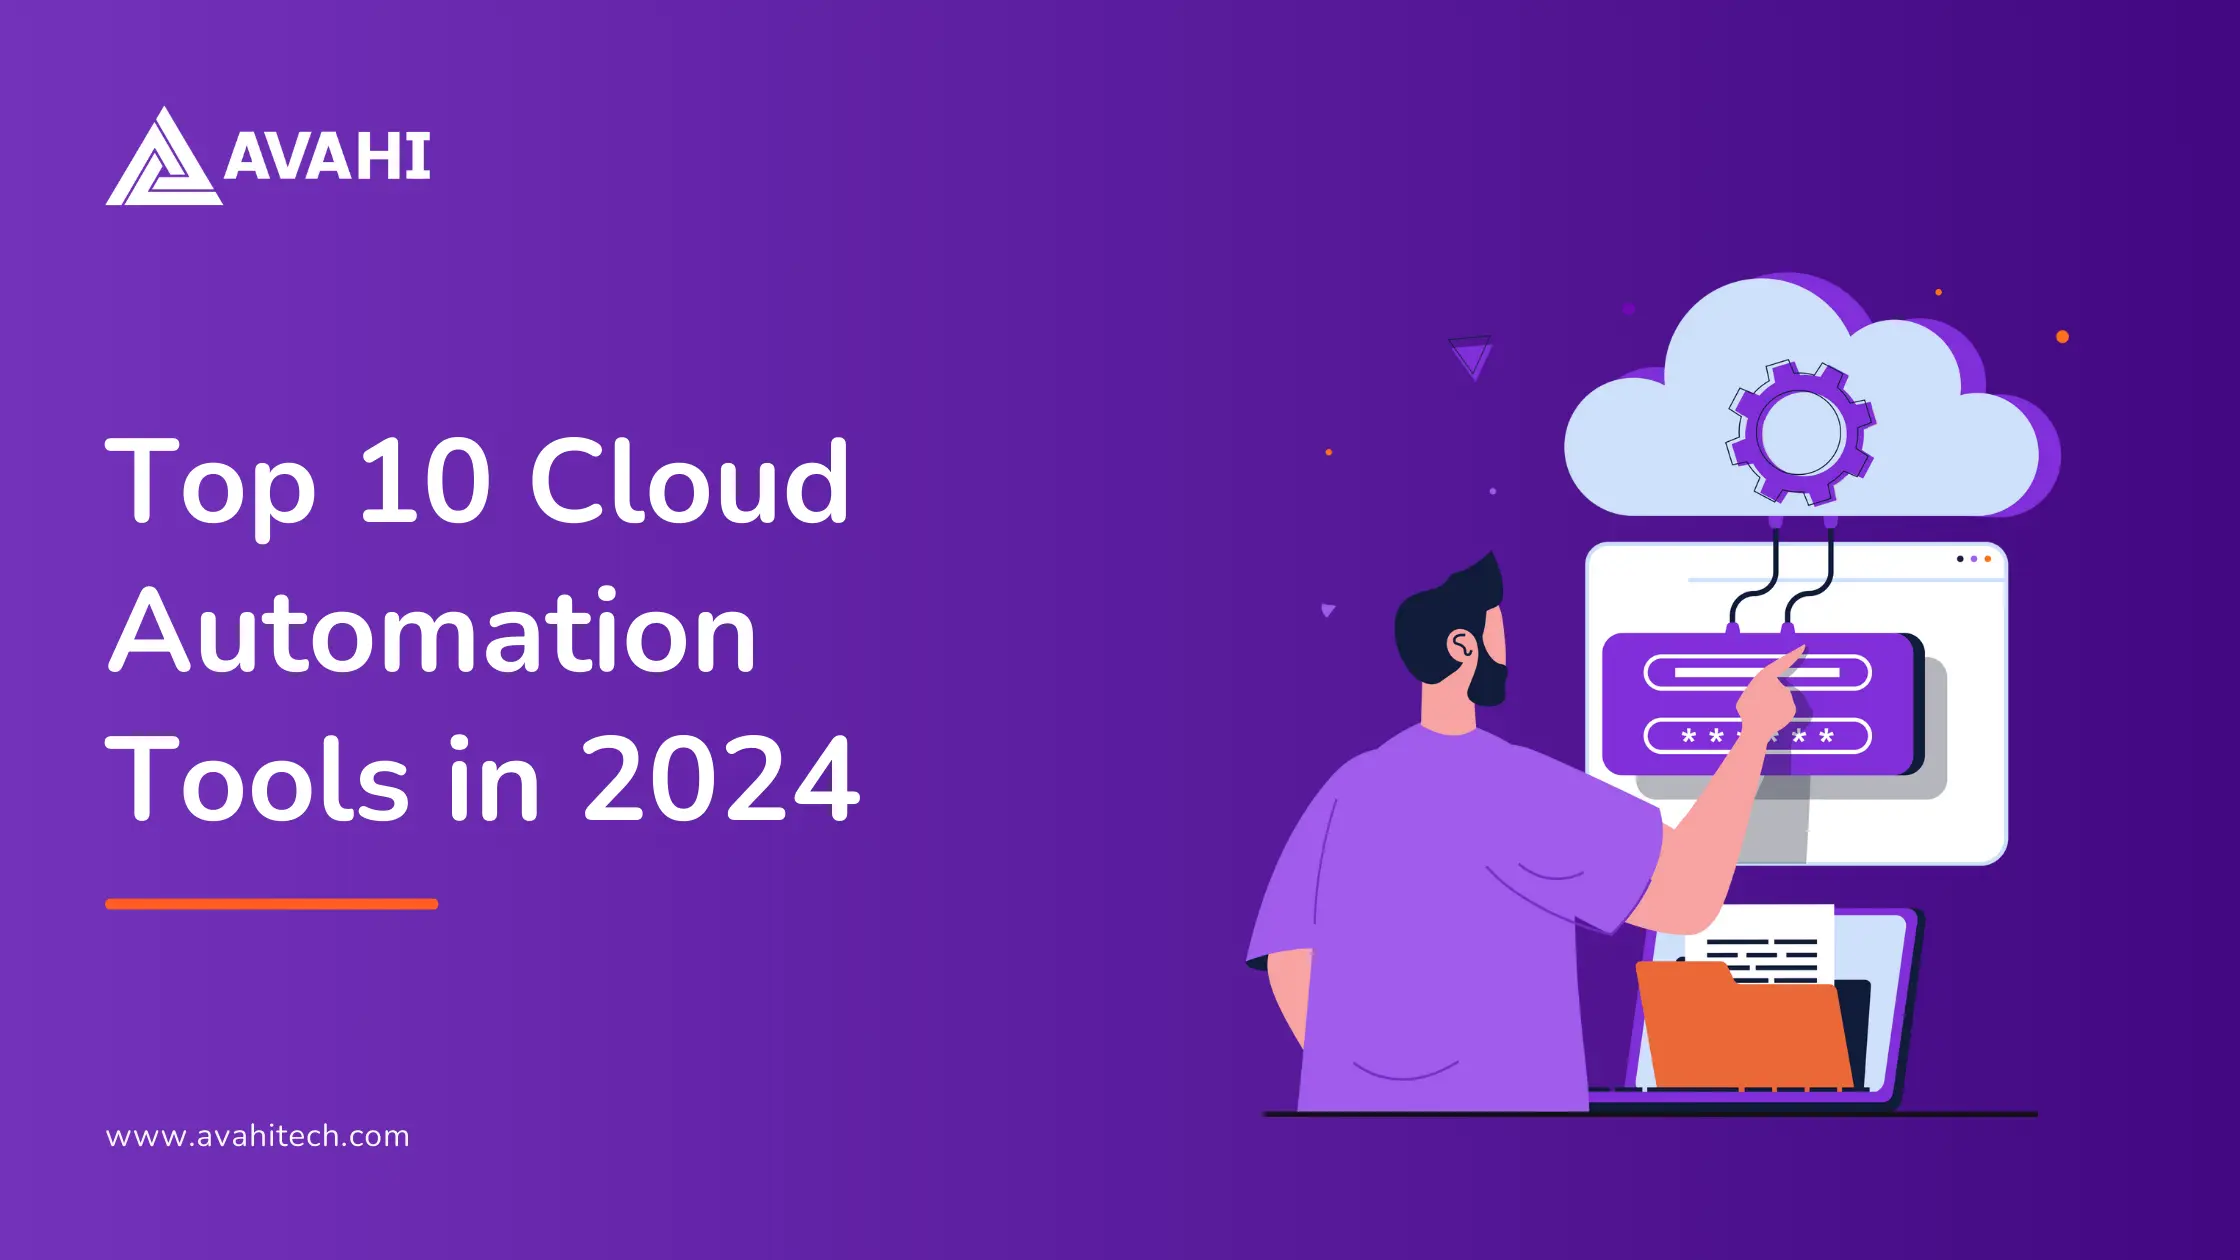 Top 10 Cloud Automation Tools in 2024